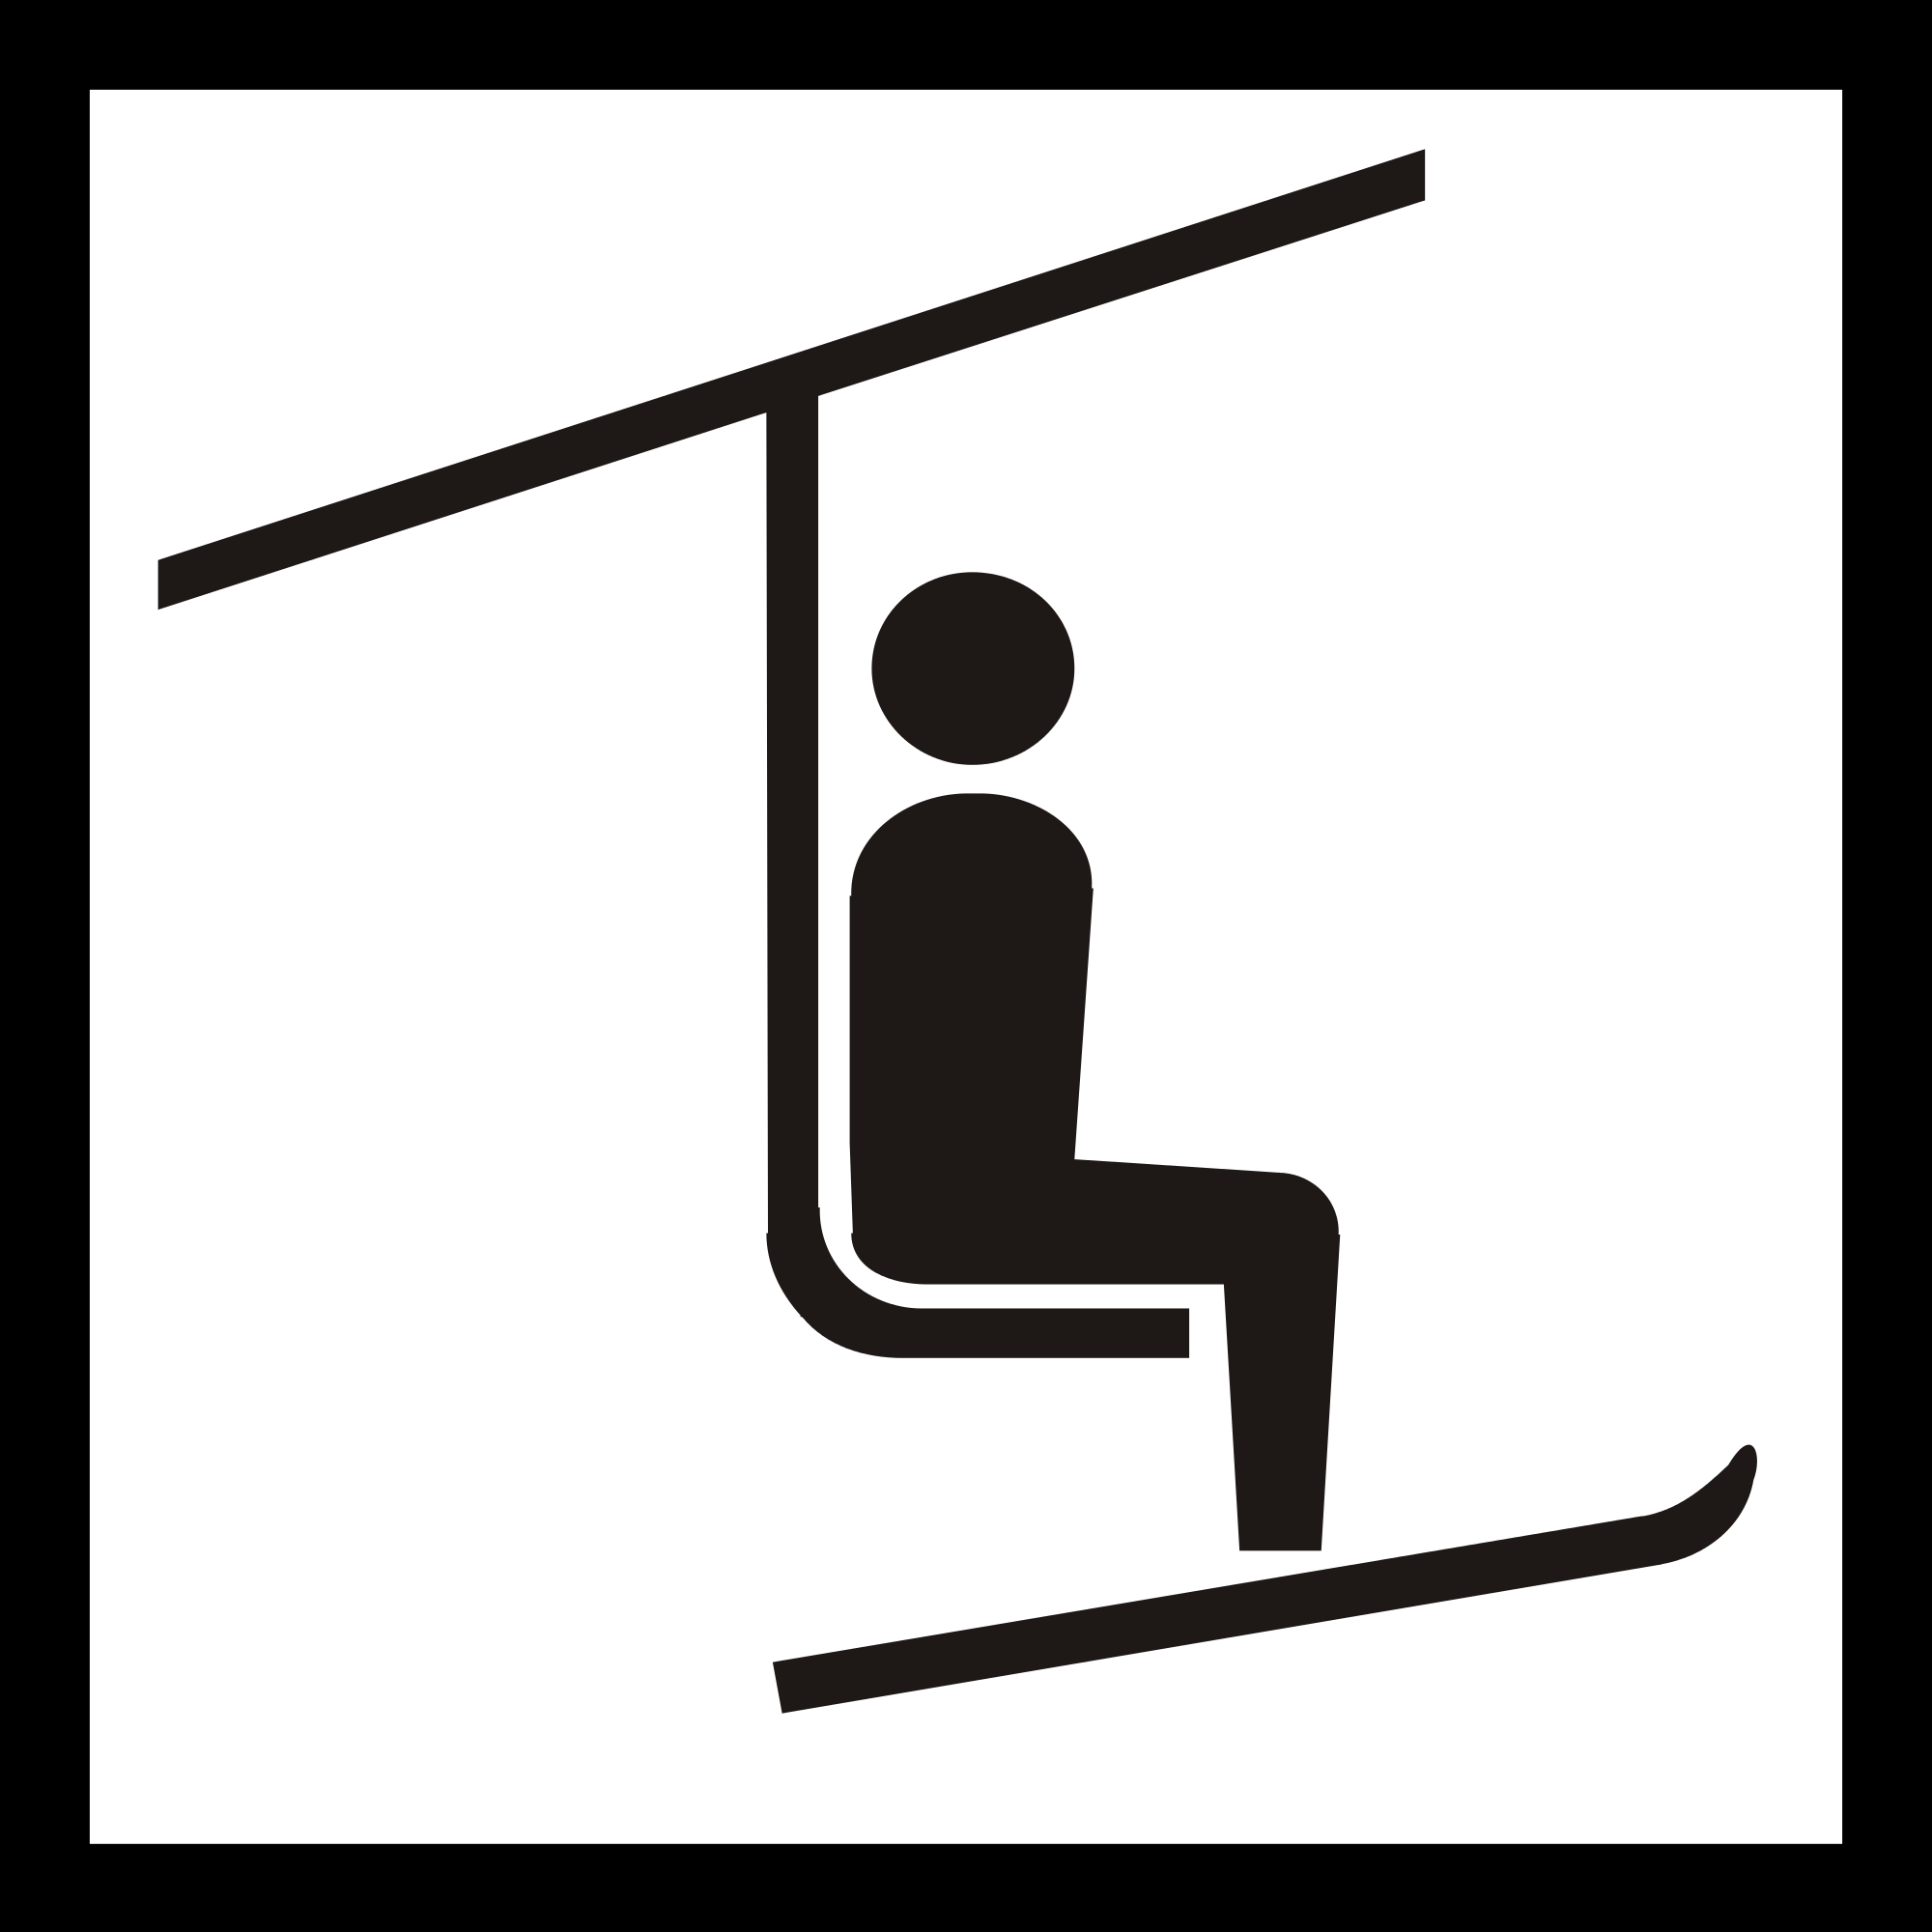 Open - Chairlift Pictogram (2000x2000)